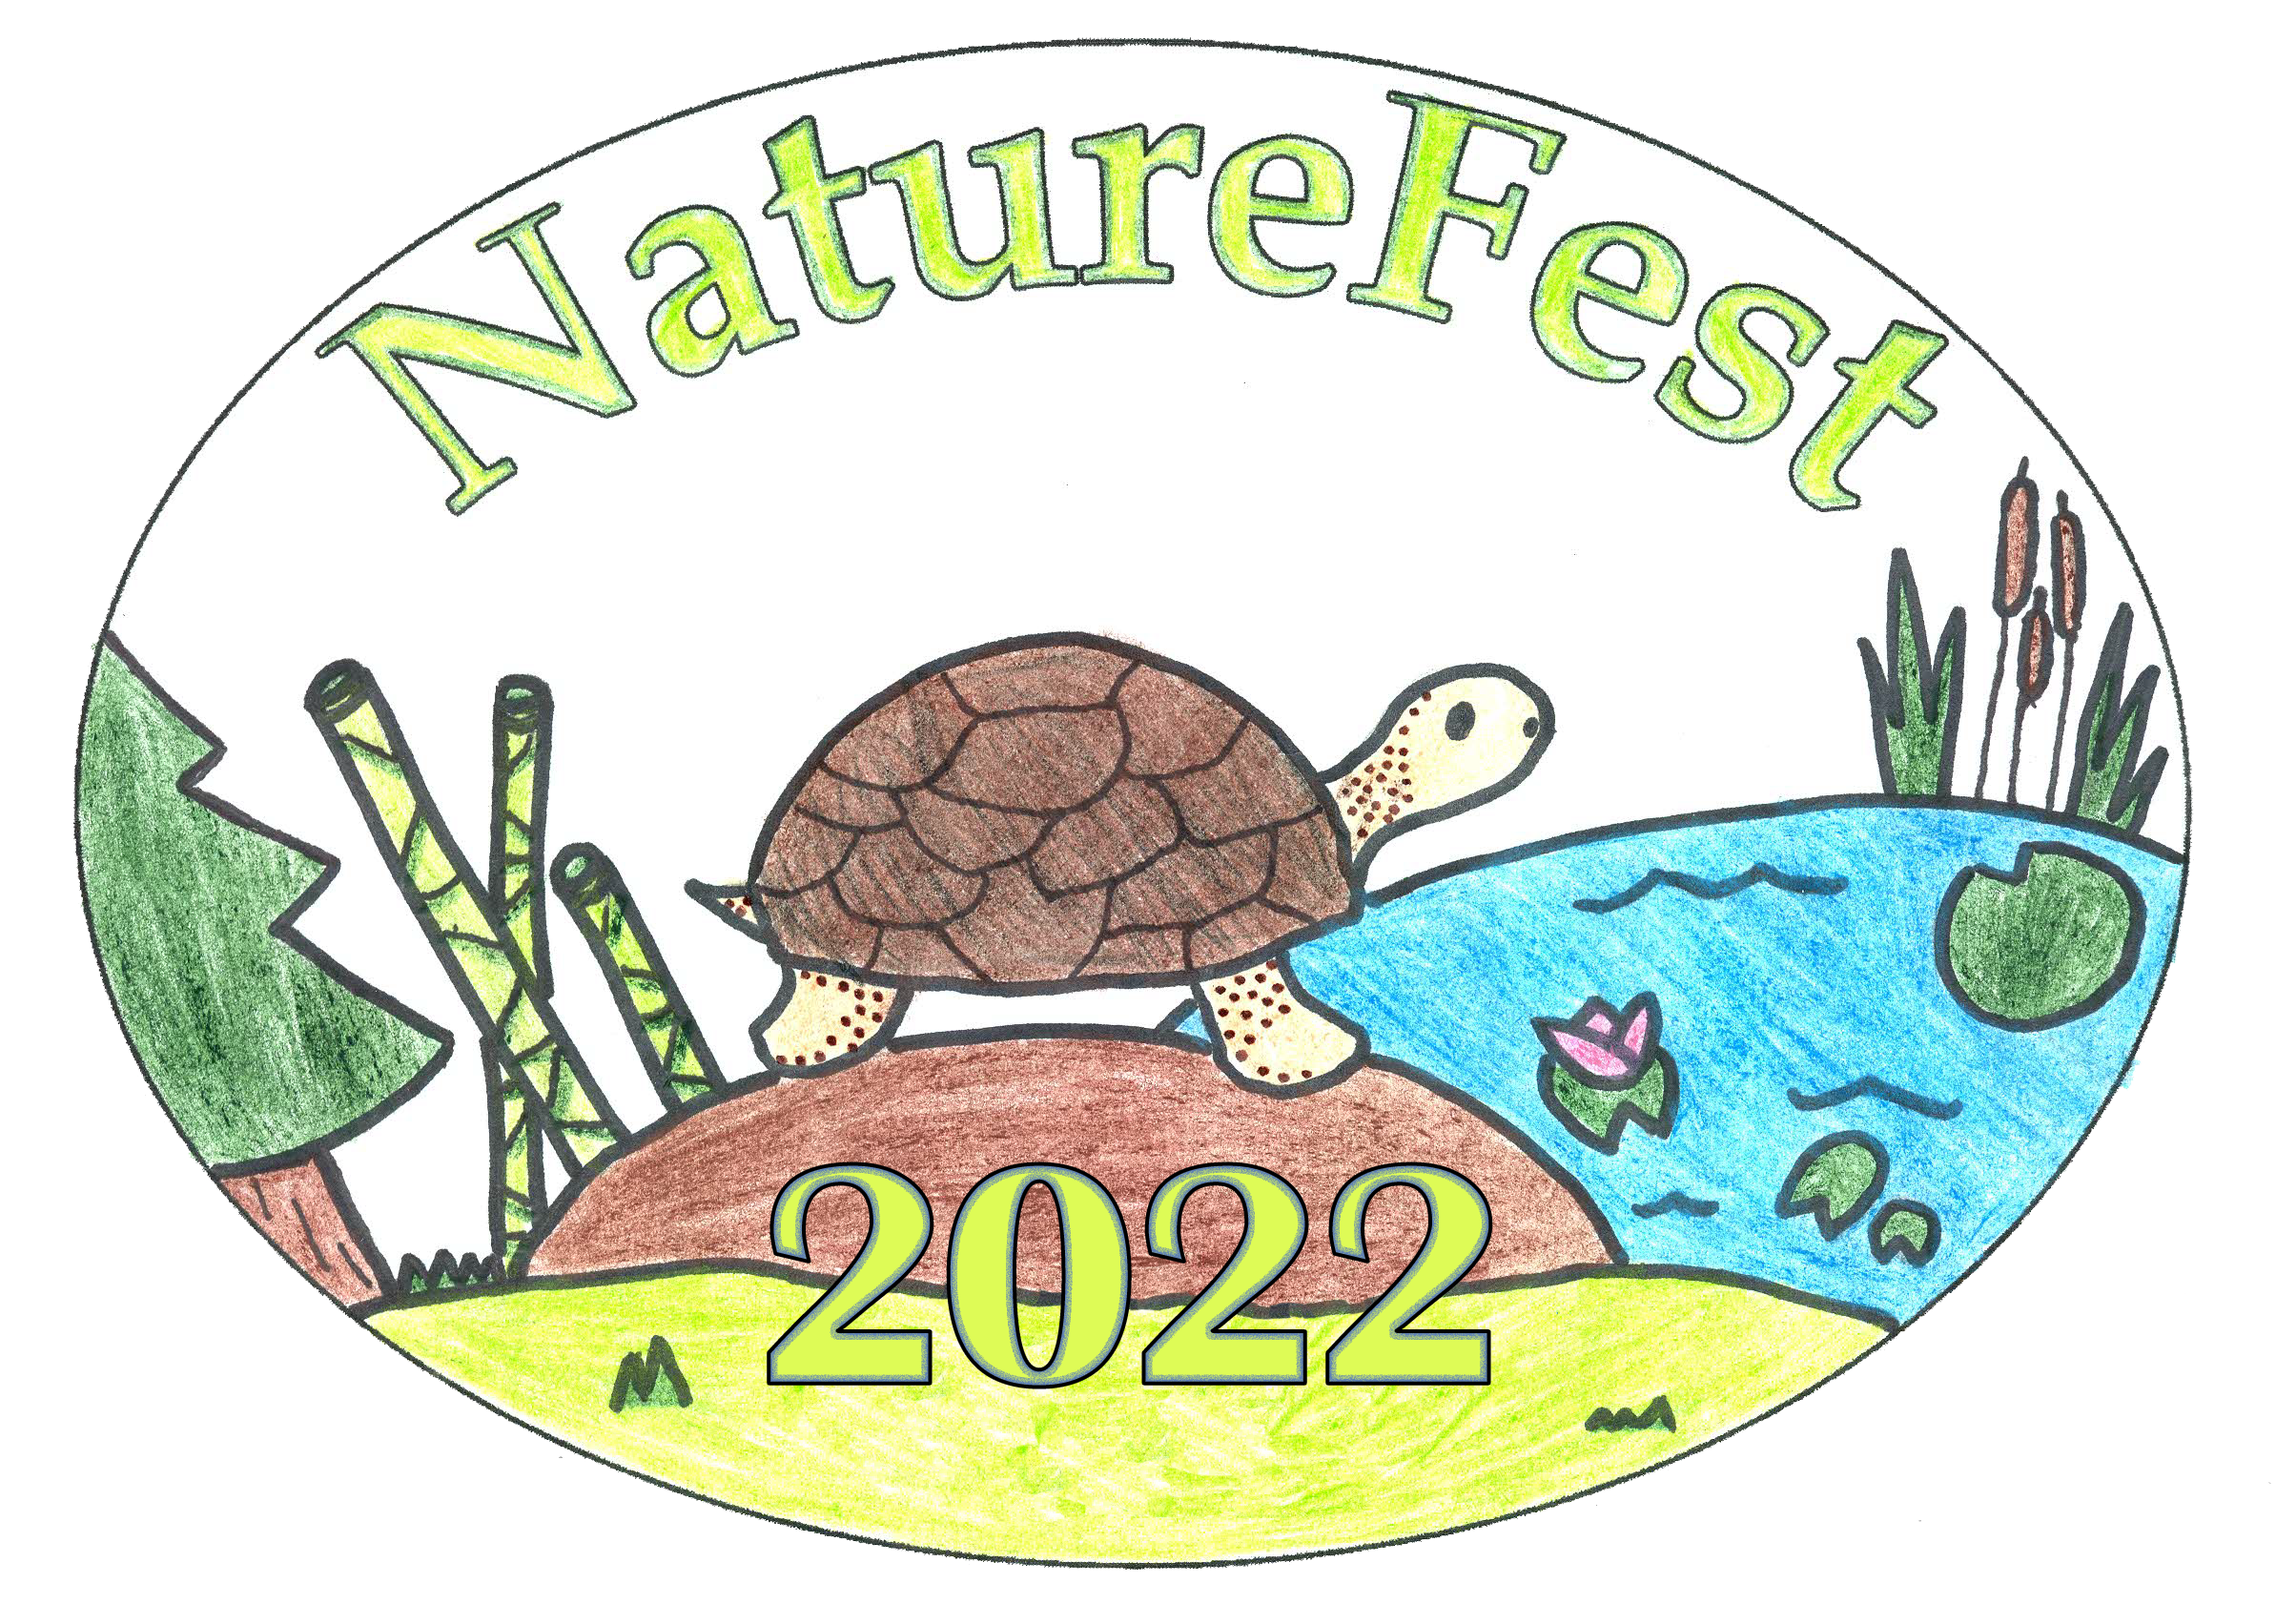 NautreFest Logo 2020 Drawing of a turtle in its habitat